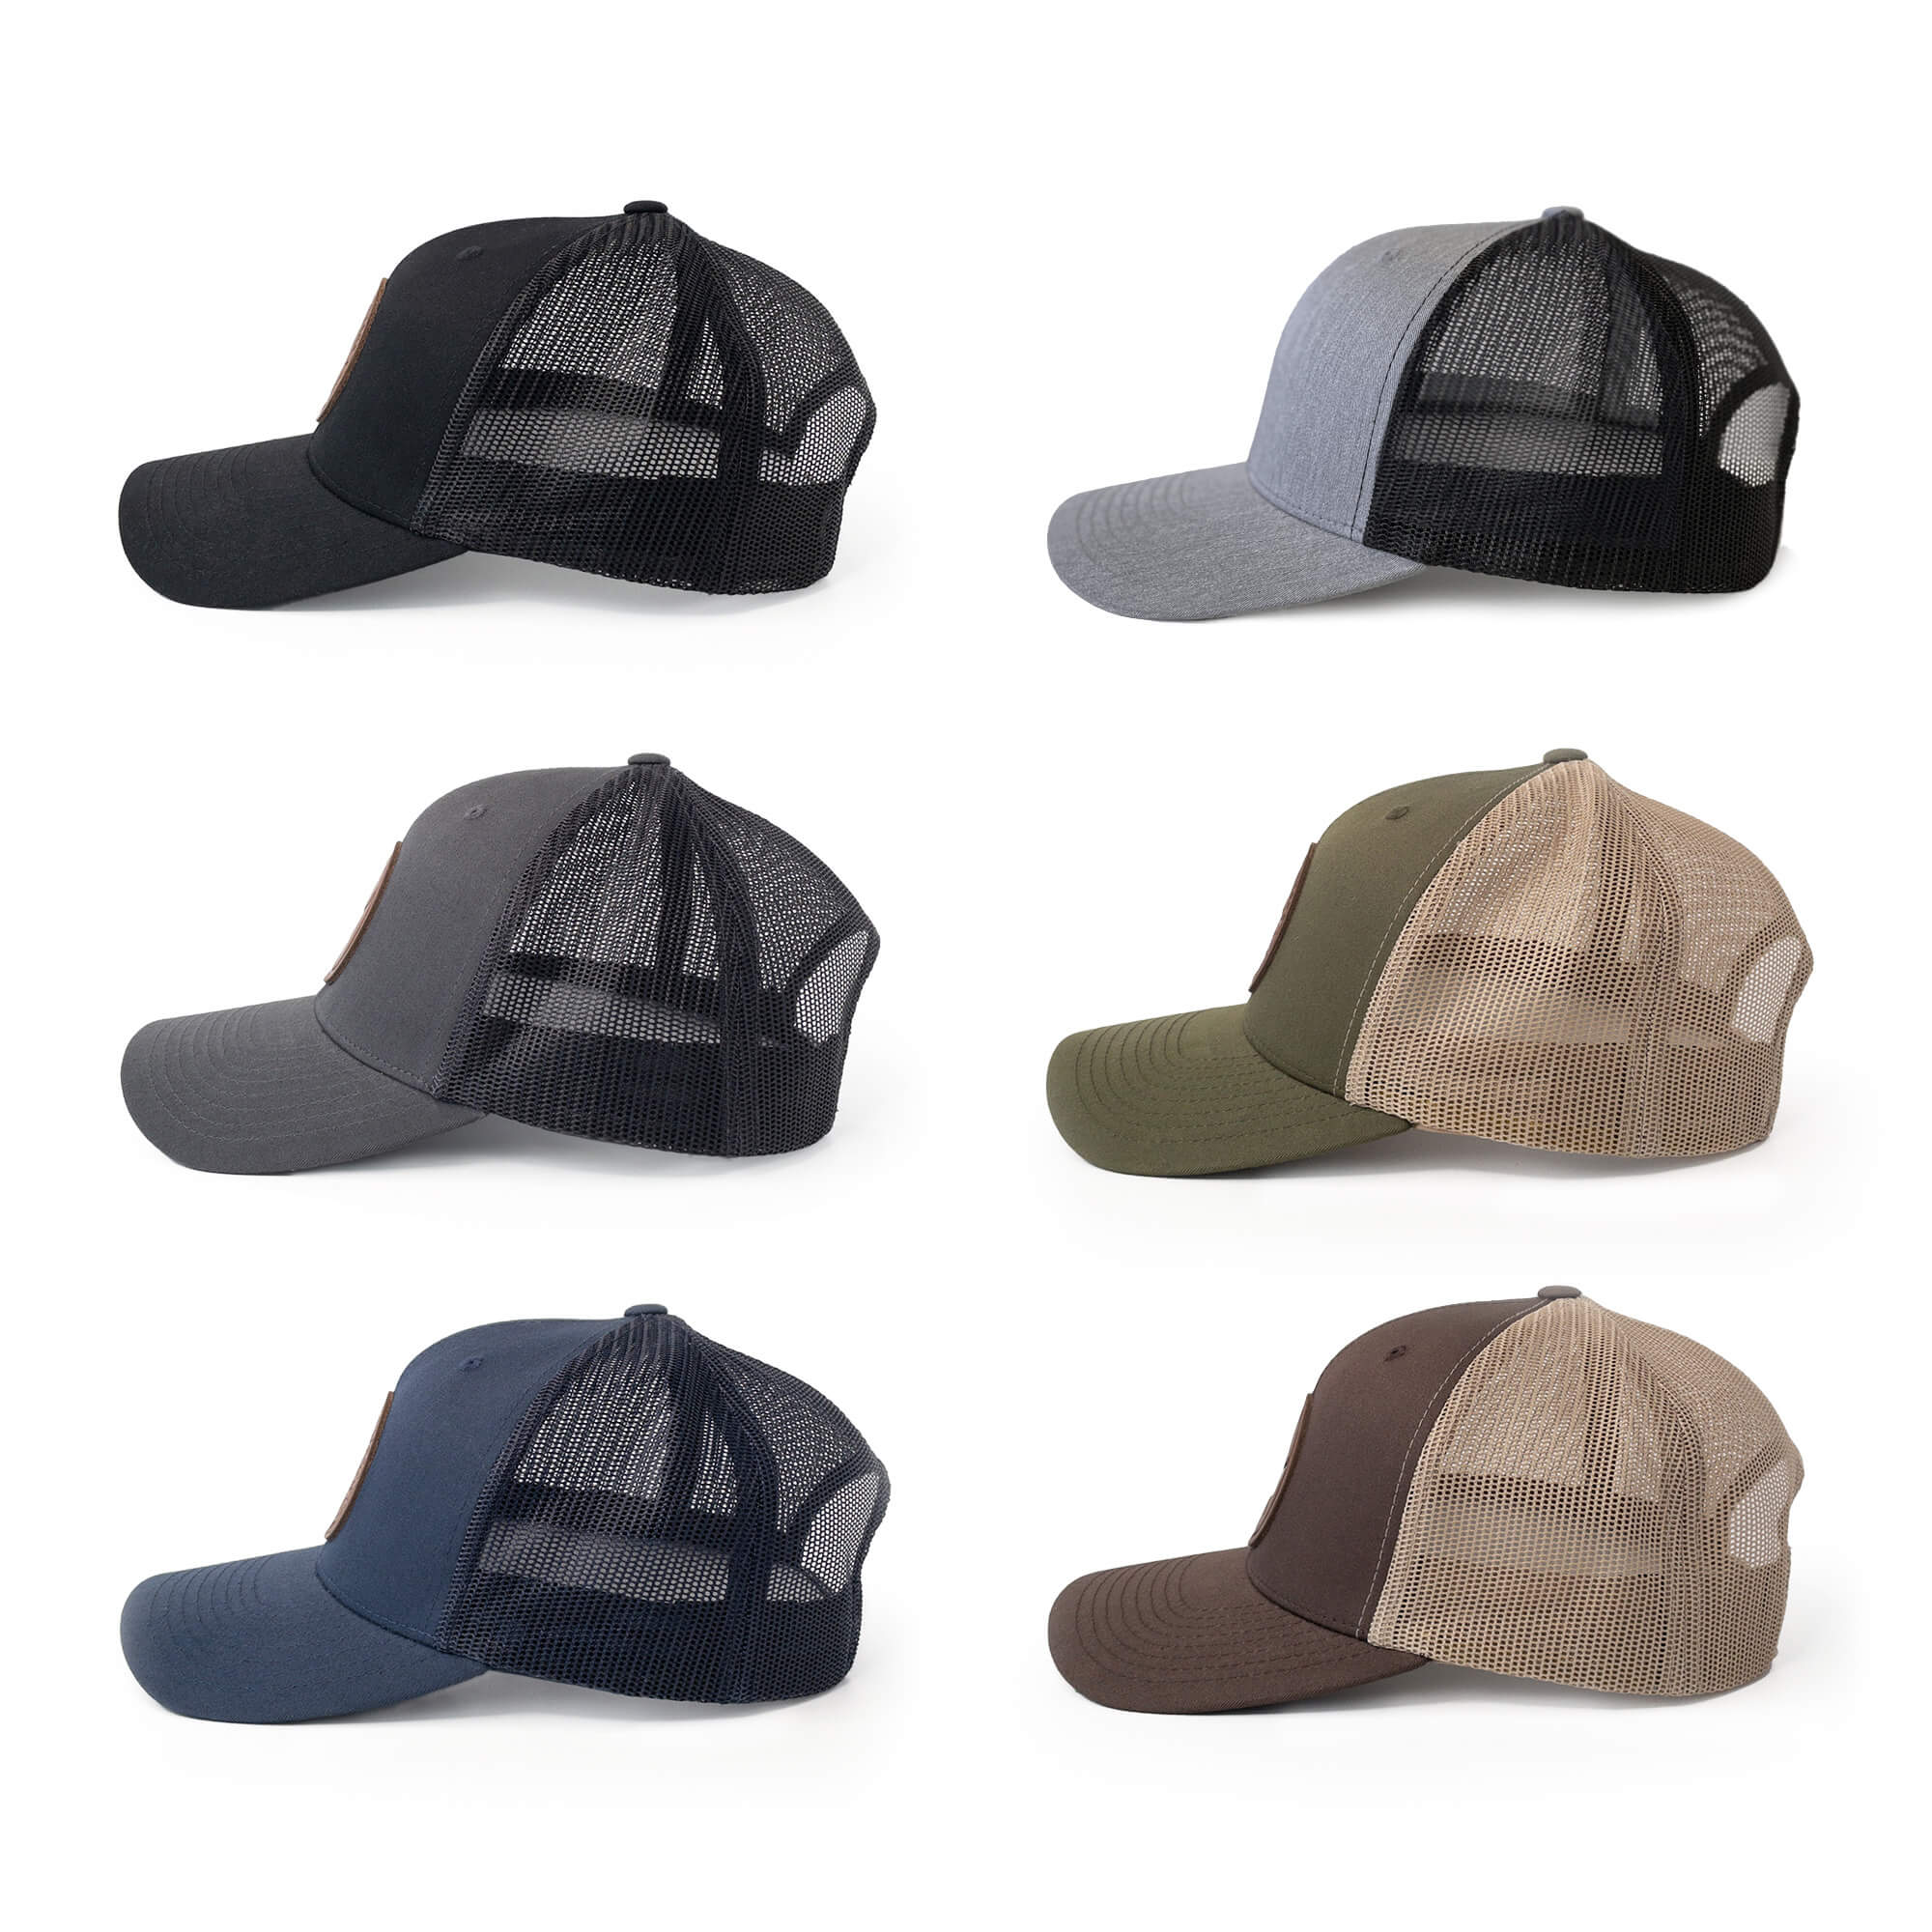 Leather patch trucker hats available in 6 colors | BLACK-003-007, CHARC-003-007, NAVY-003-007, HGREY-003-007, MOSS-003-007, BROWN-003-007